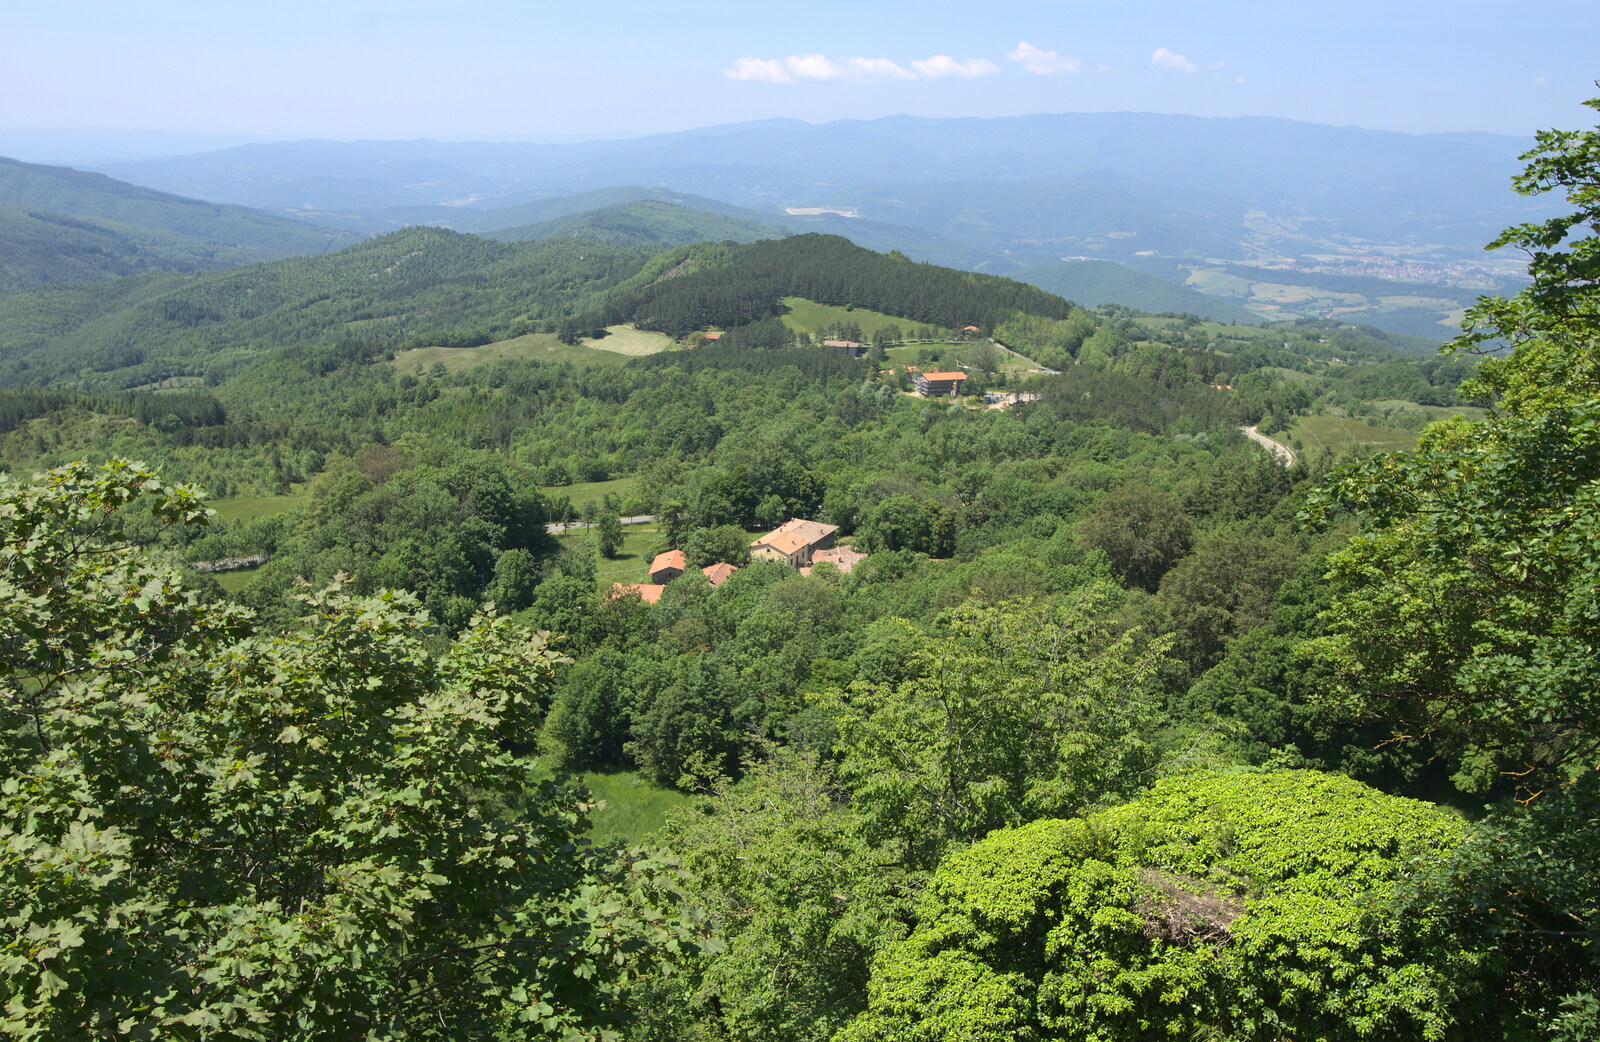 A view from the monastery from La Verna Monastery and the Fireflies of Tuscany, Italy - 14th June 2013